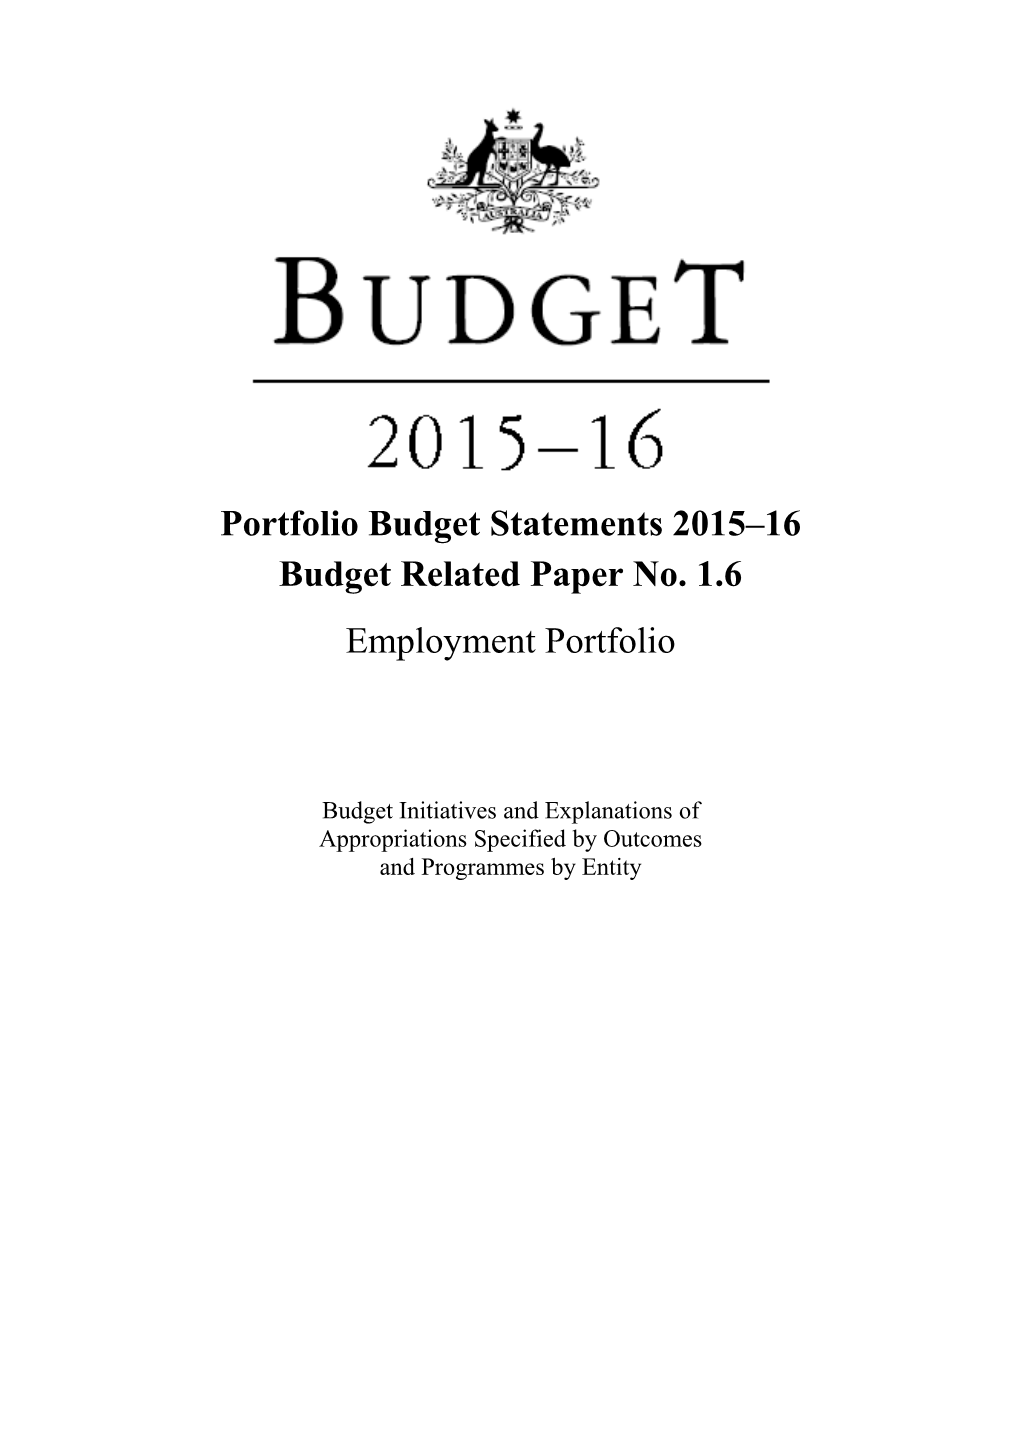 Budget Related Paper No. 1.6